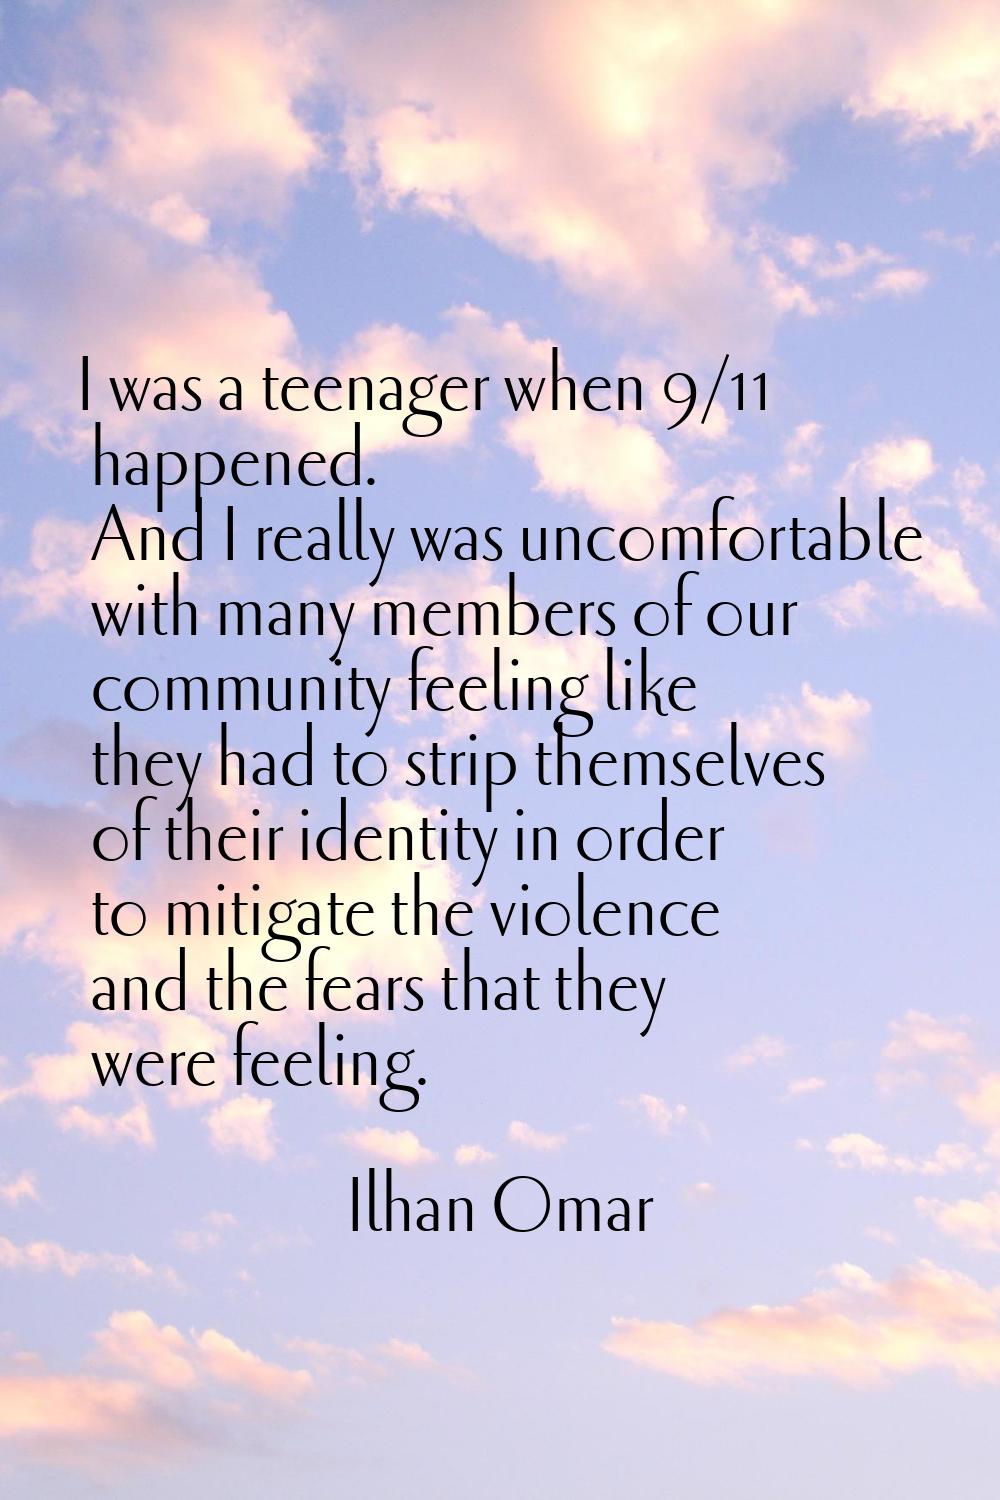 I was a teenager when 9/11 happened. And I really was uncomfortable with many members of our commun